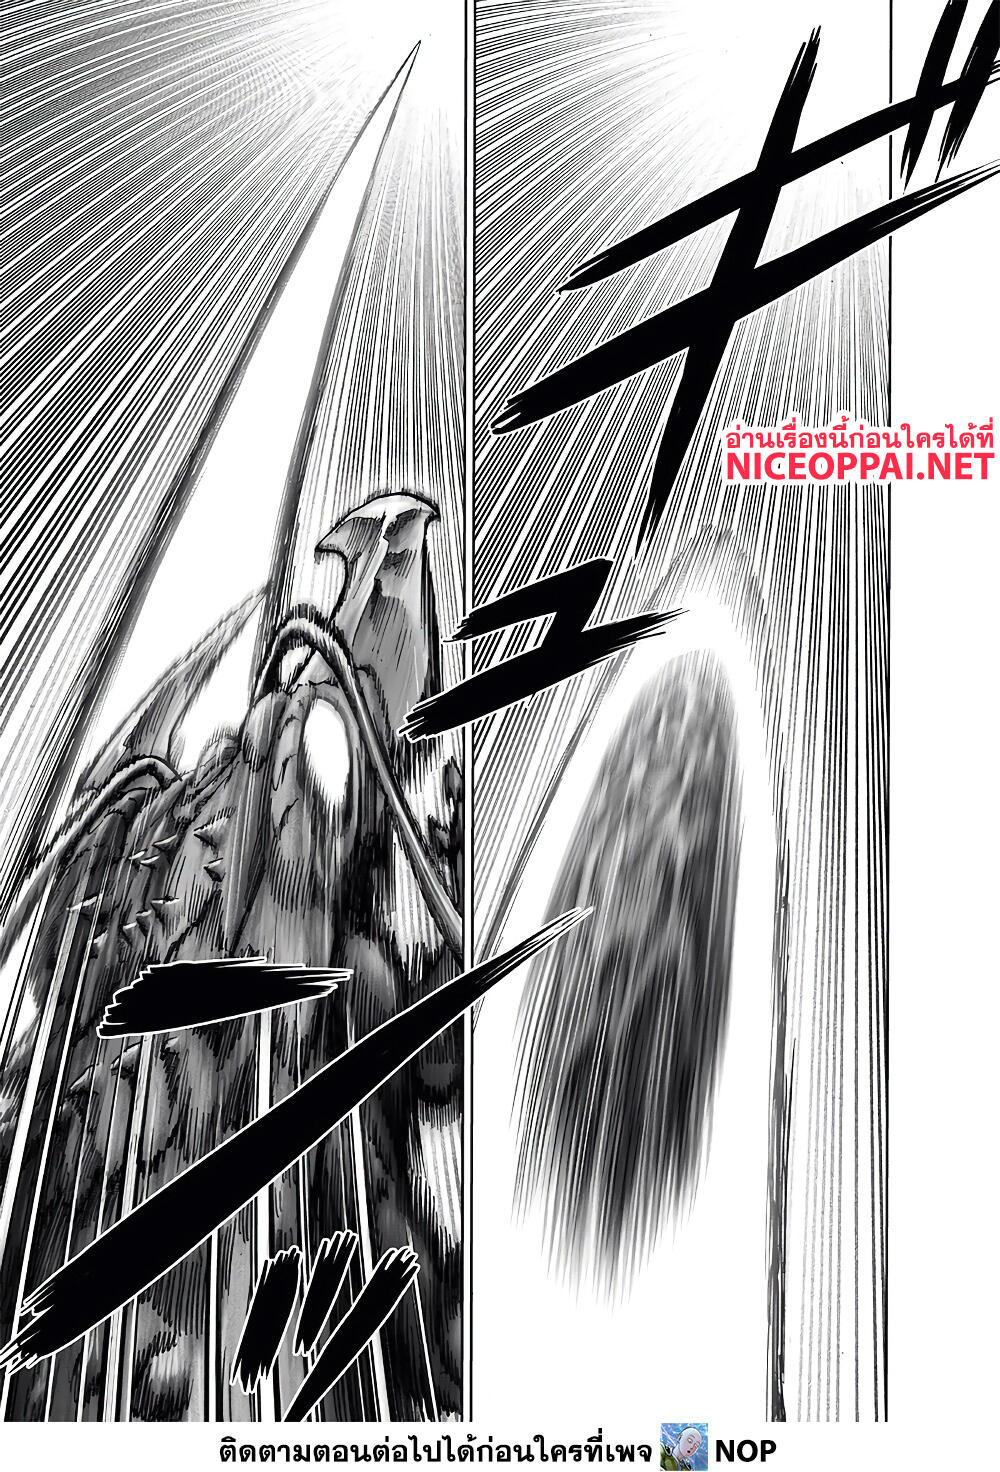 One Punch Man 159 TH